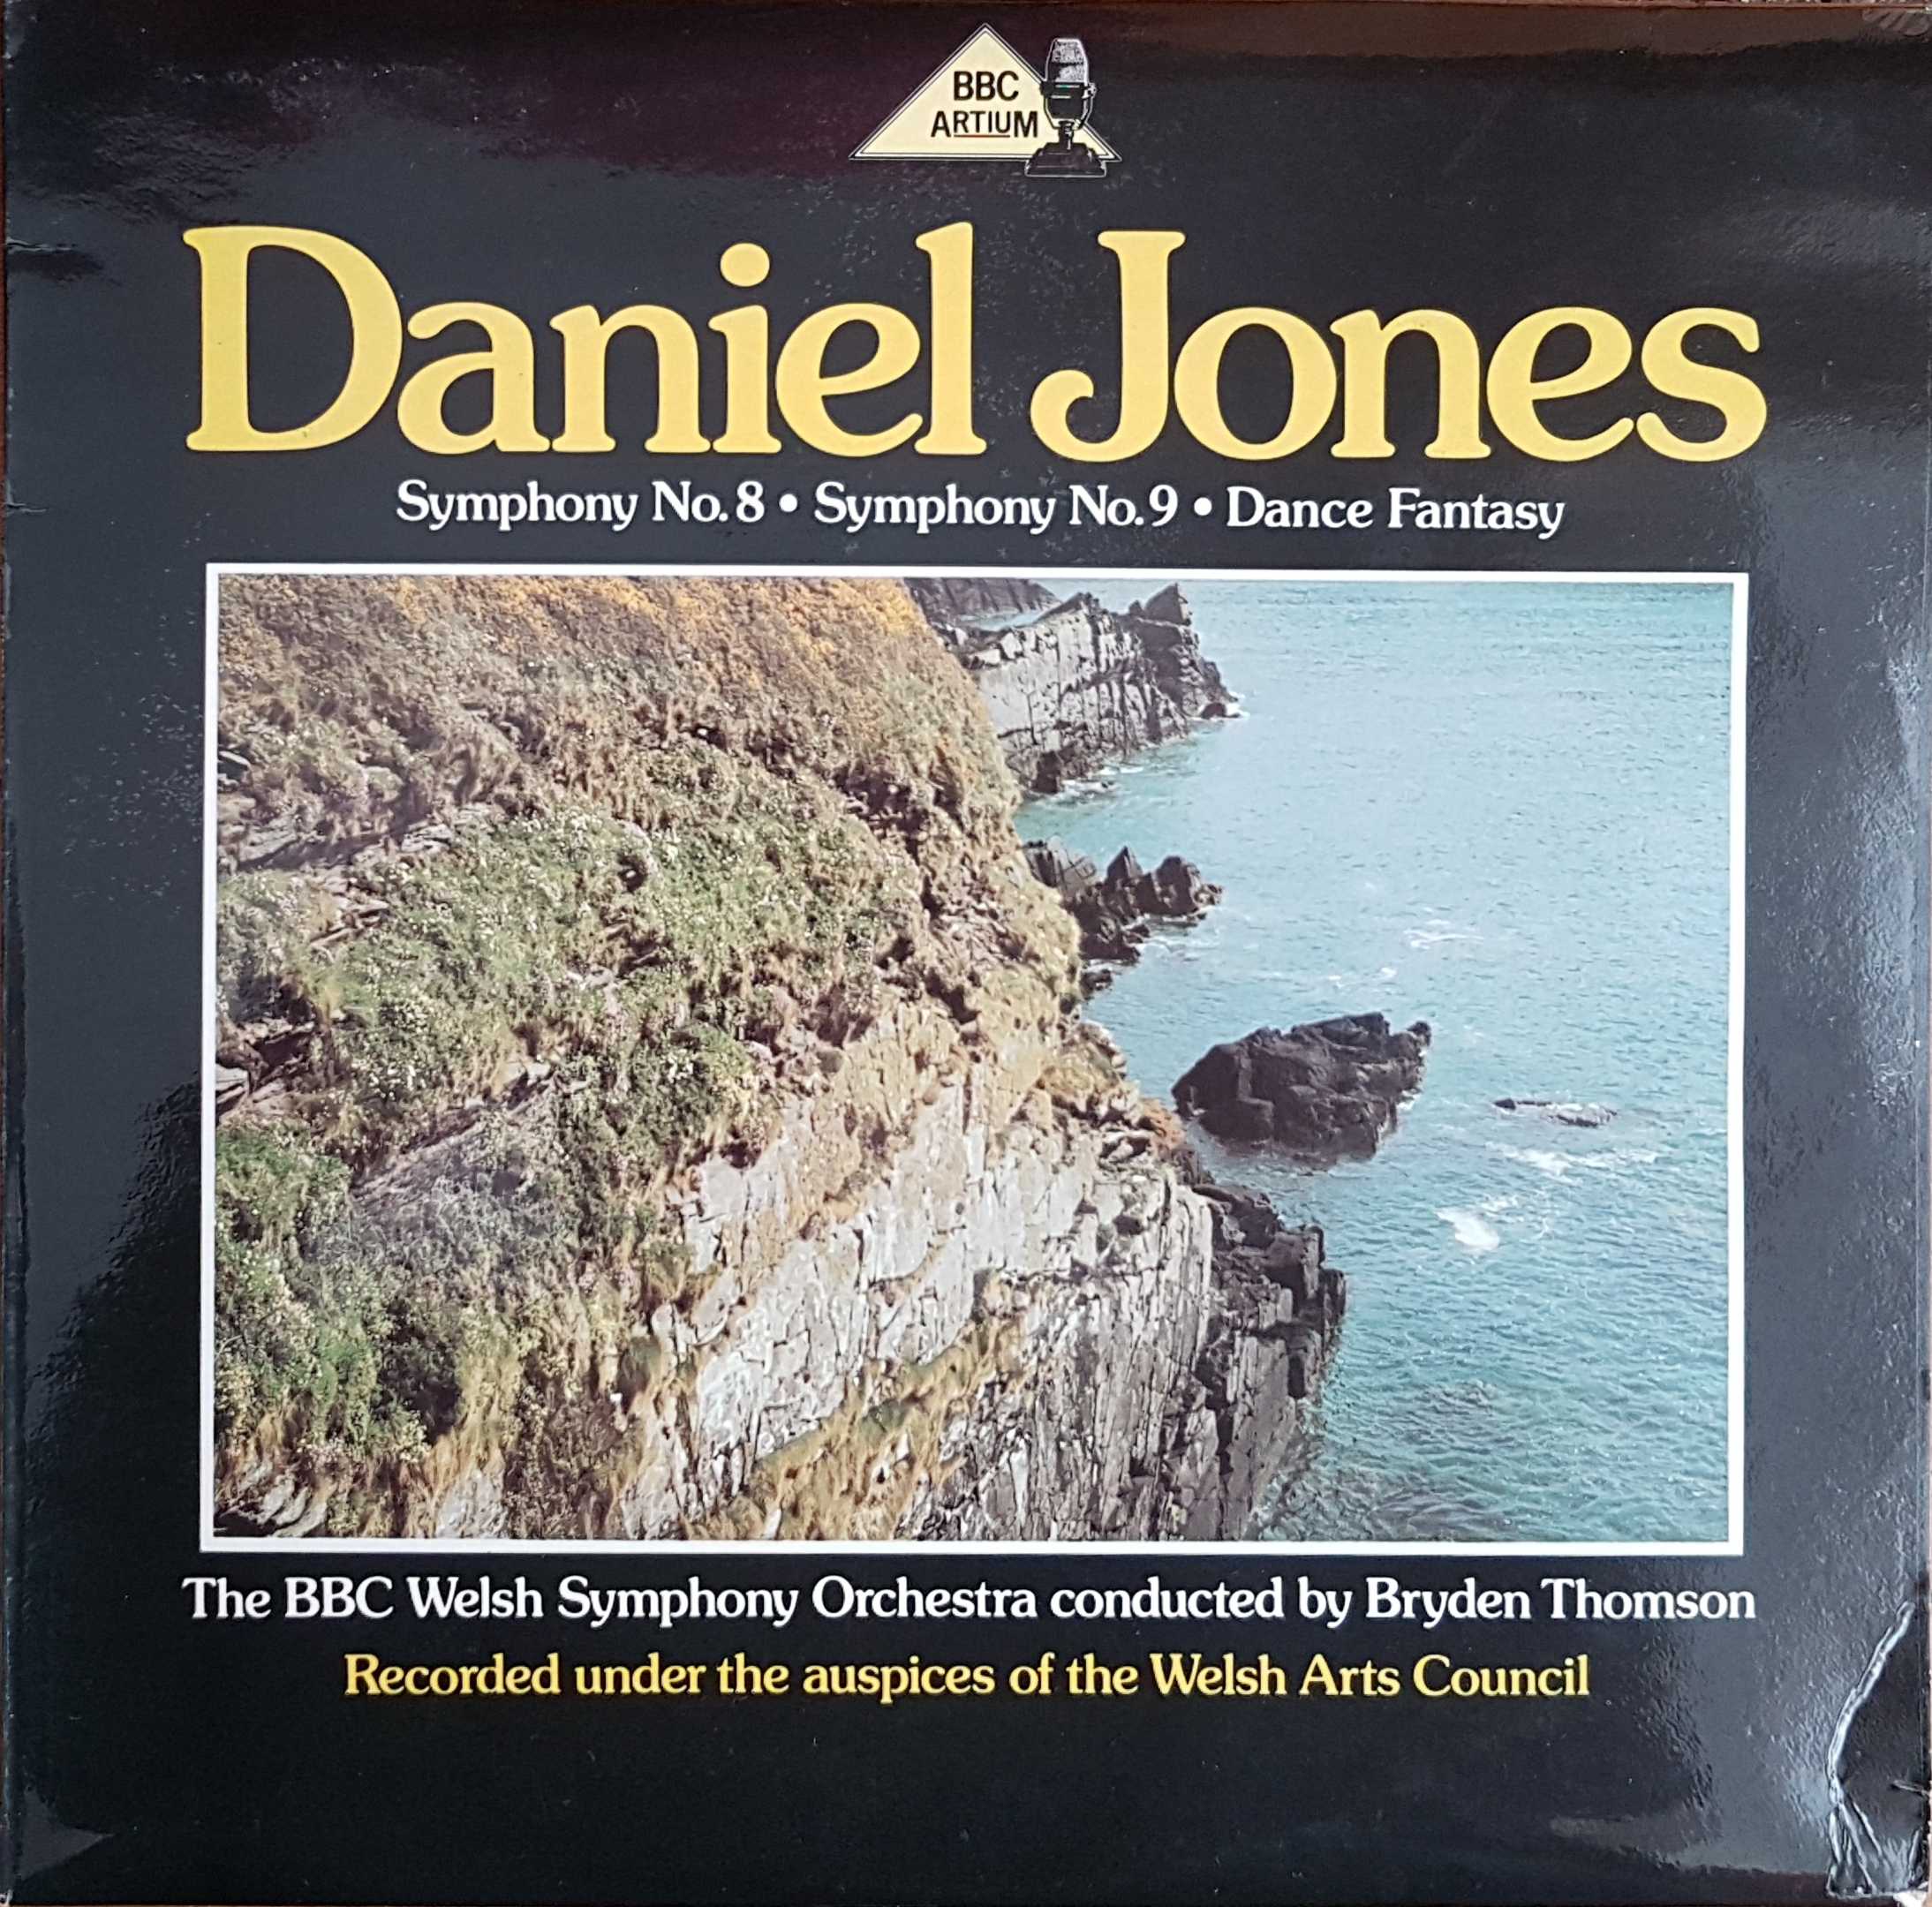 Picture of REGL 359 Daniel Jones - Symphony no. 8 & 9 & dance fantasy by artist Daniel Jones from the BBC records and Tapes library